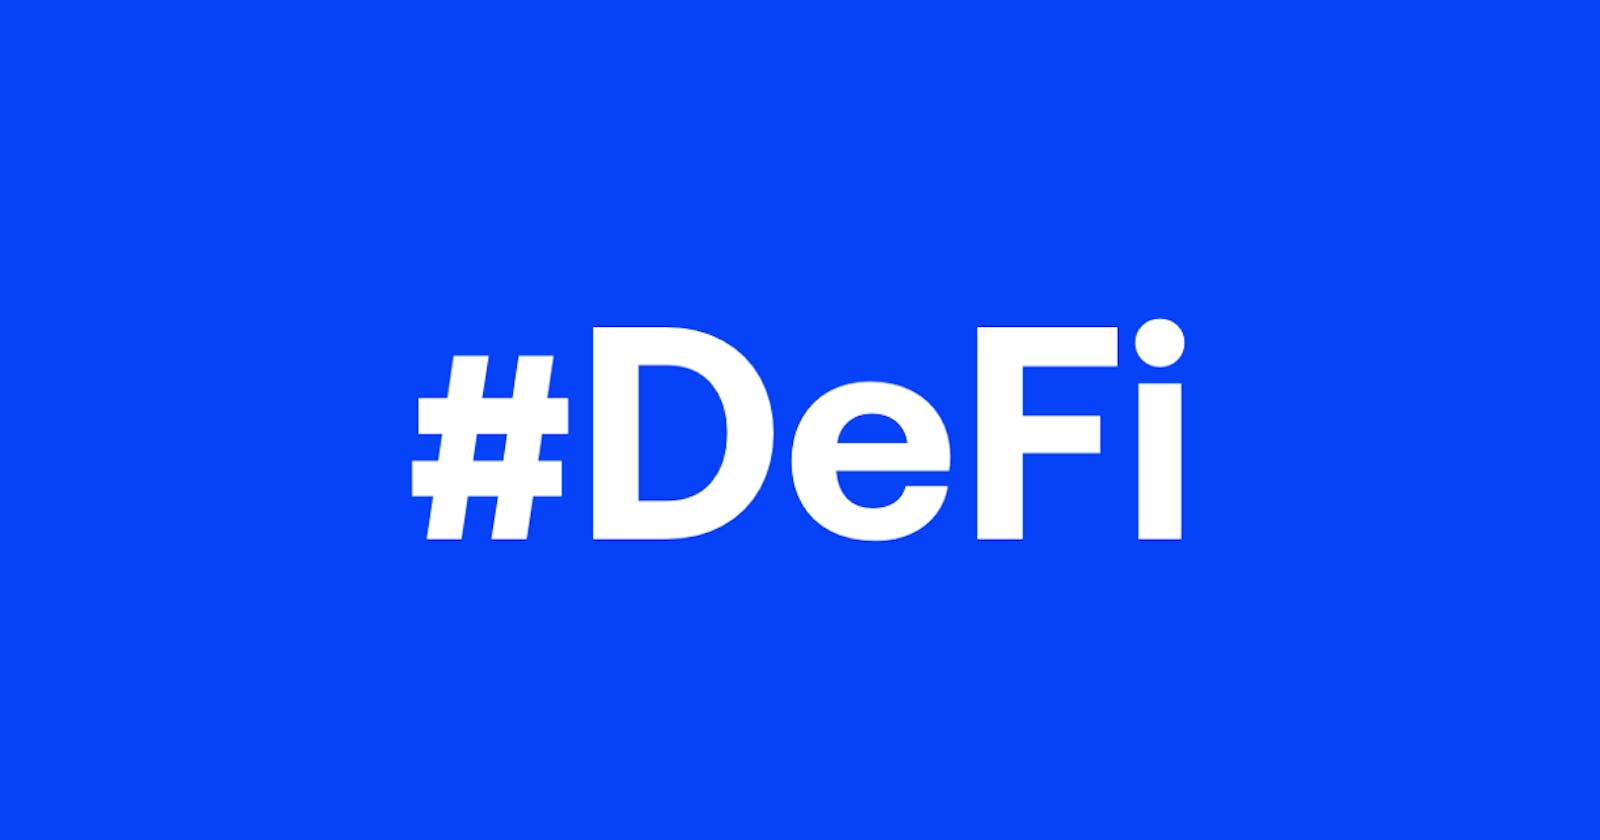 Getting started with DeFi and Stable Coins